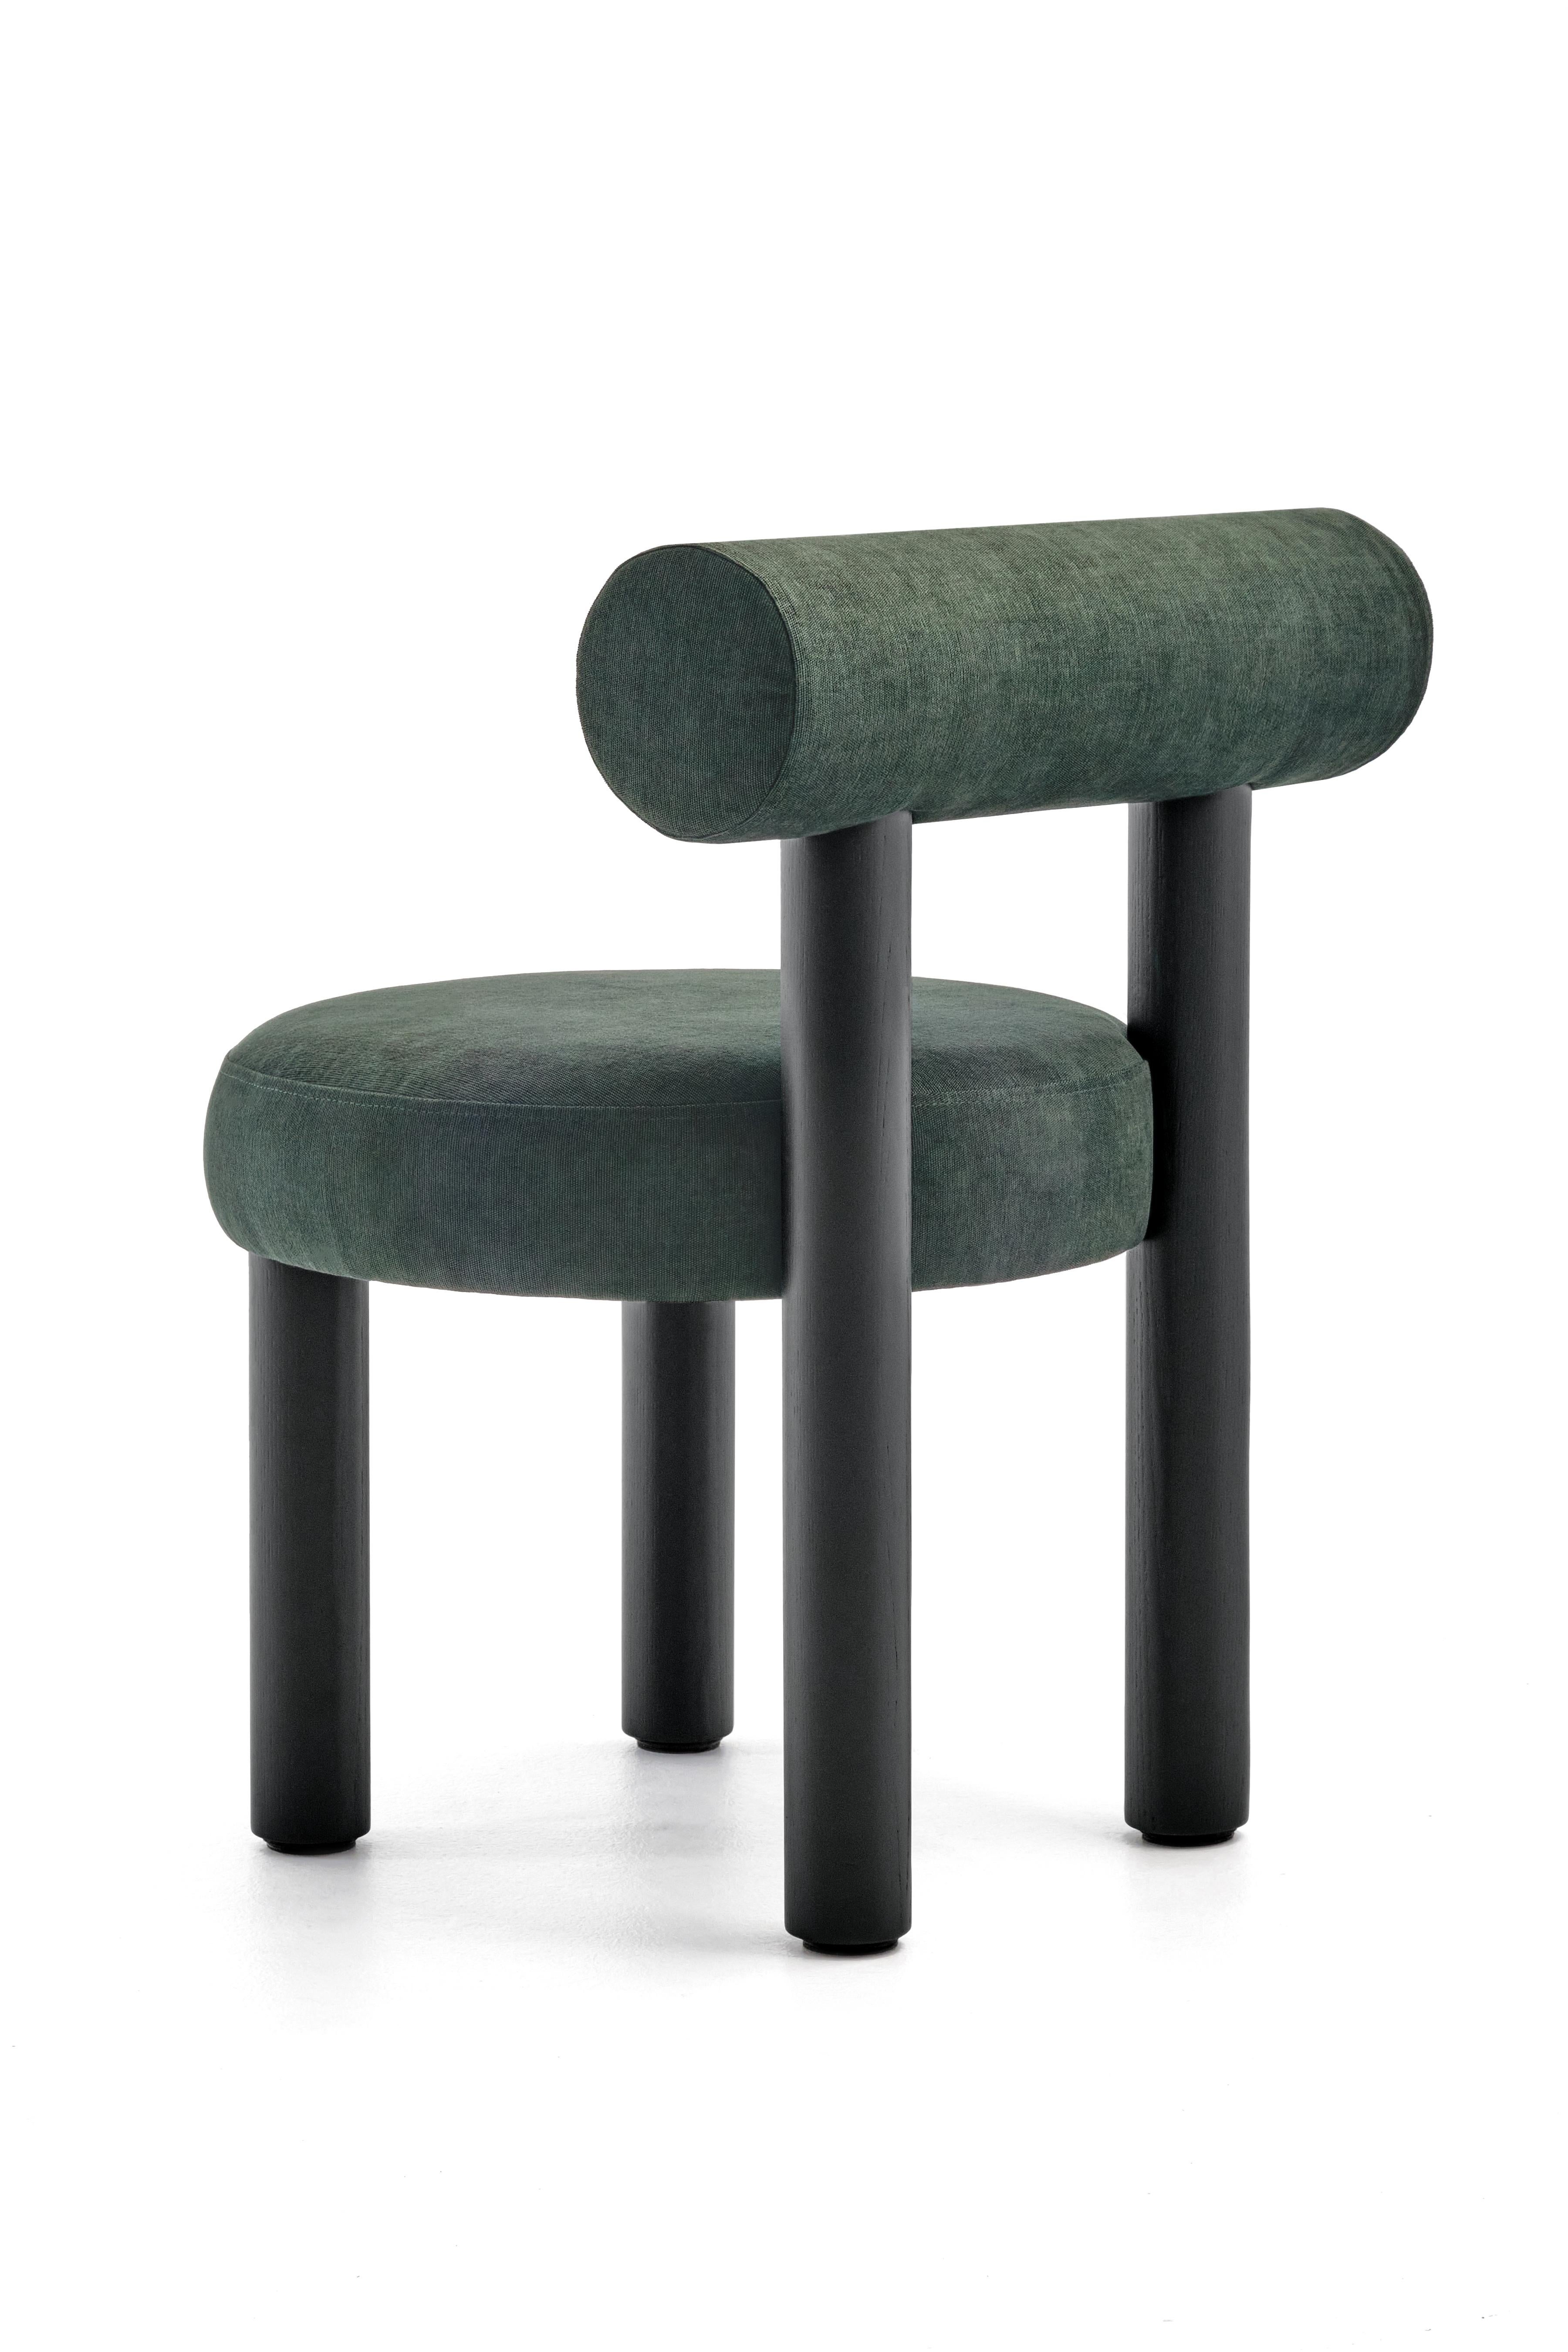 Chair Gropius CS2
Designer: Kateryna Sokolova

Model in the main picture Wool, 
Ranger 68
Dimensions:
Height: 74 cm / 29,13 in
Width: 57 cm / 22,44 in
Depth: 57 cm / 22,44 in
Seat height: 47 cm / 18,11 in

New NOOM furniture collection is